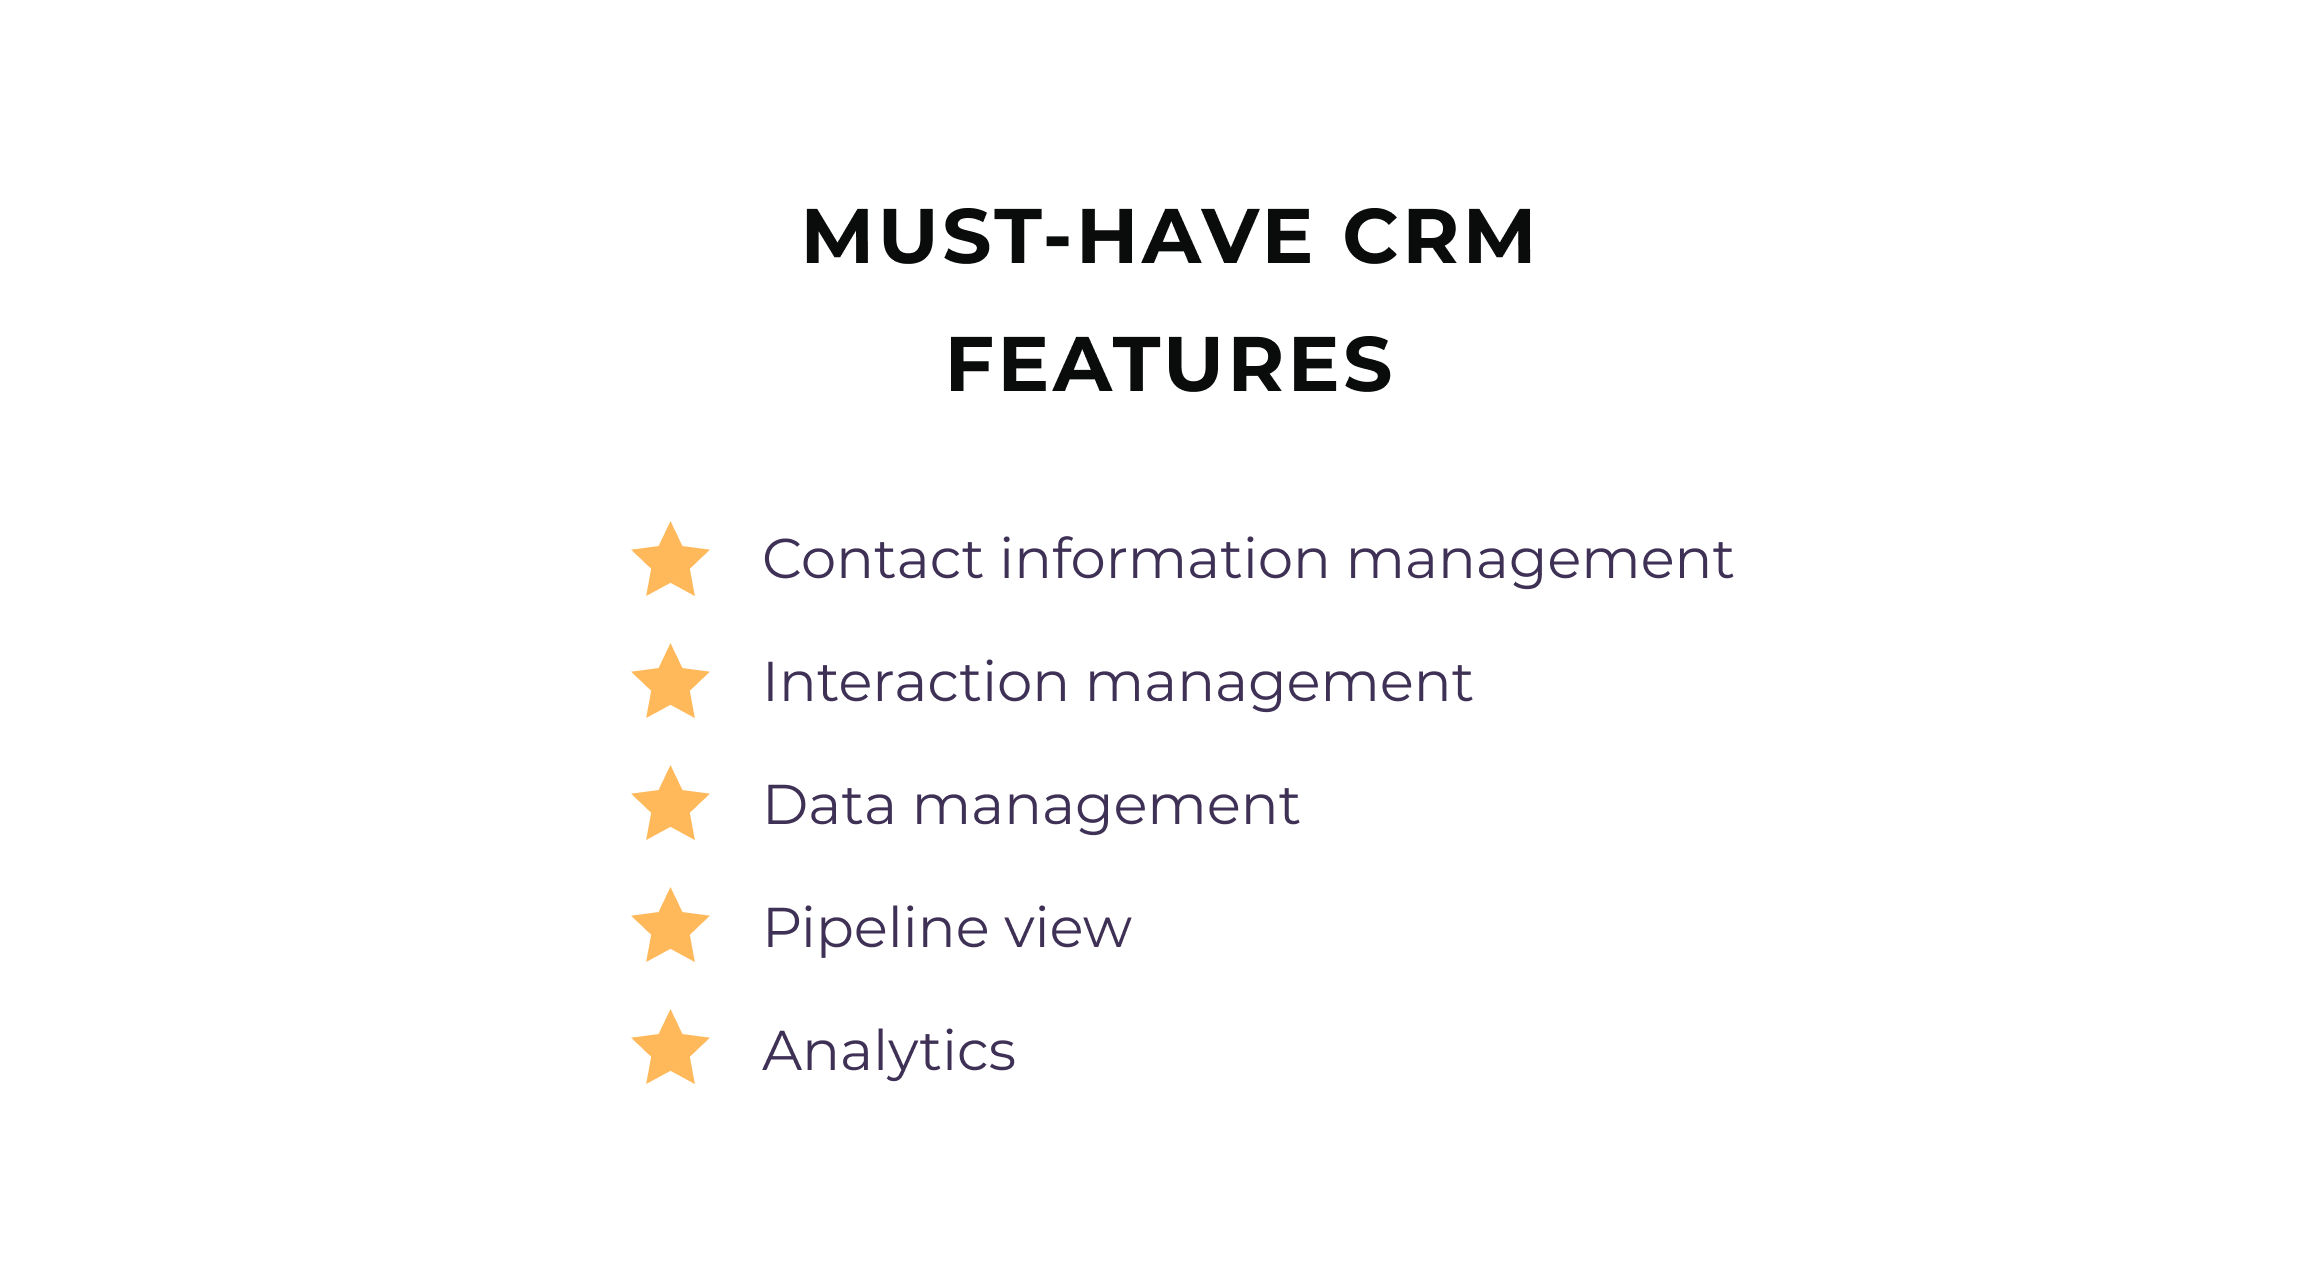 CRM features list